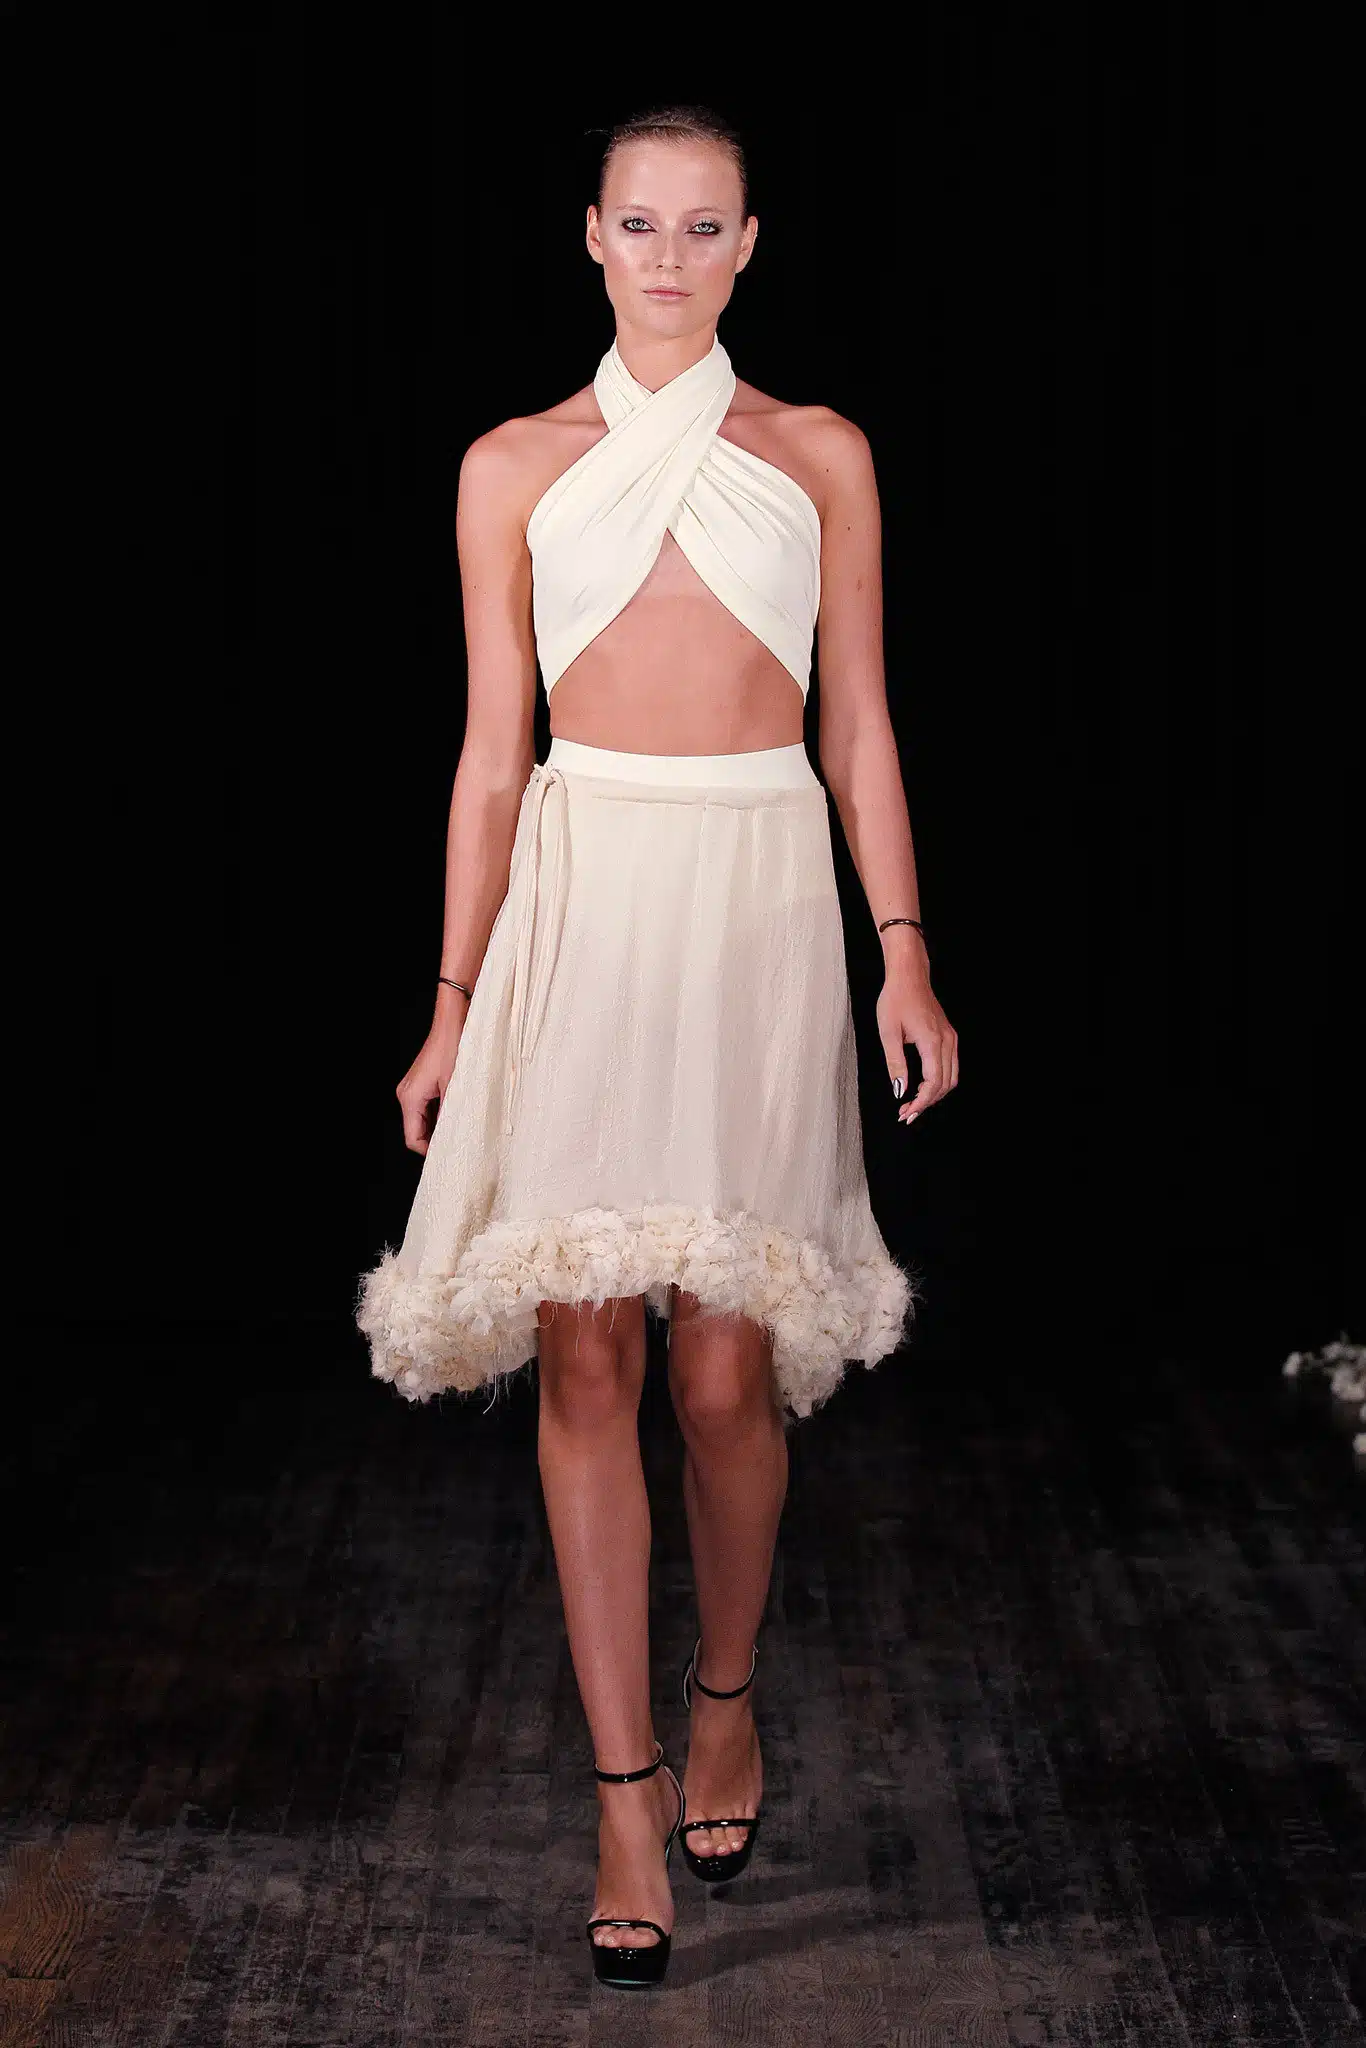 Image from SS14 SHOW Collection